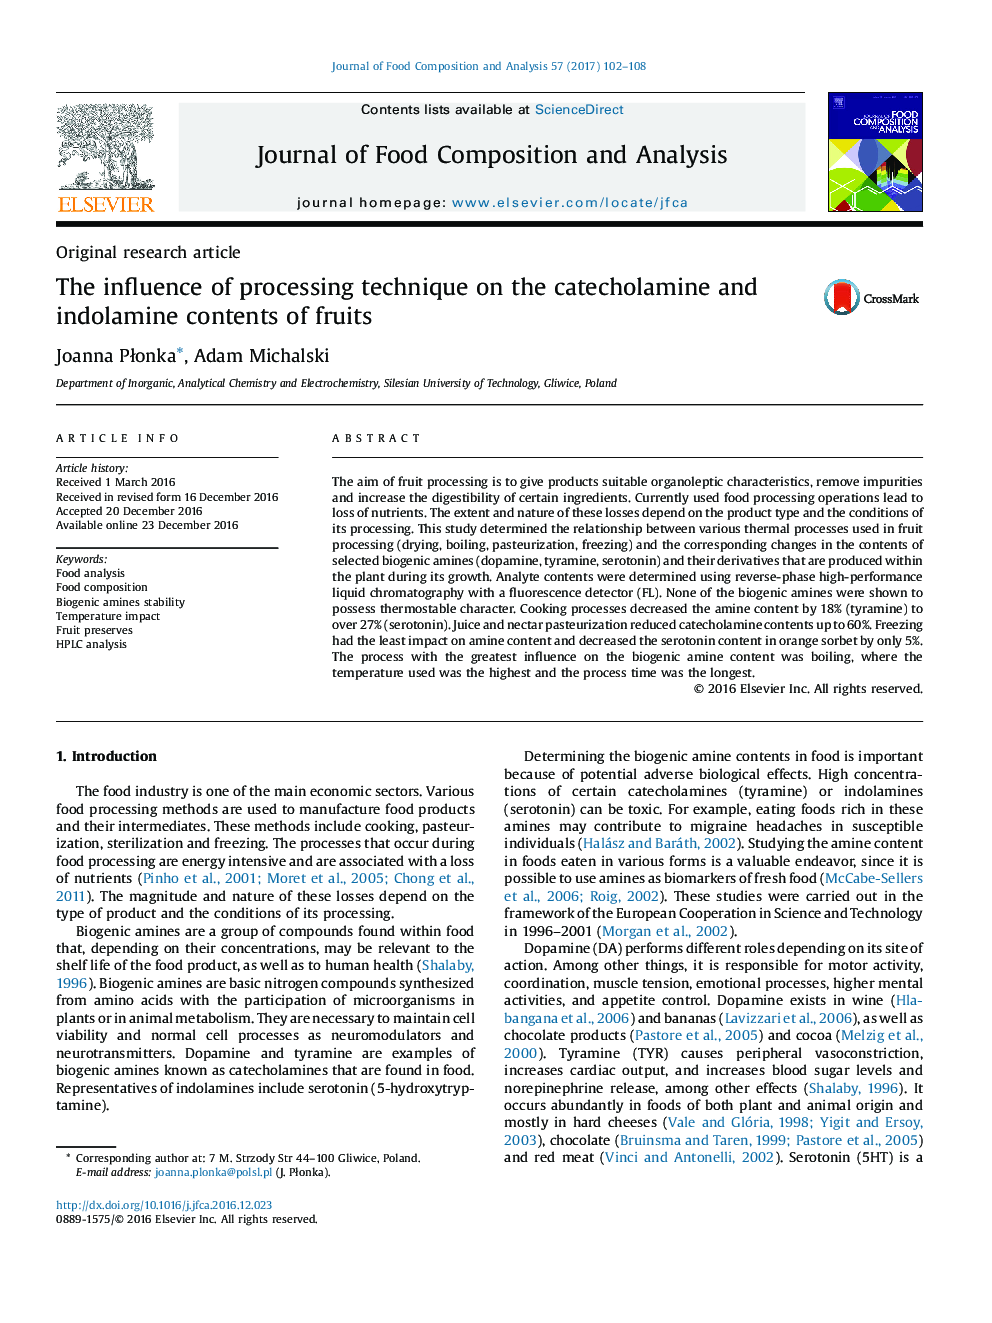 Original research articleThe influence of processing technique on the catecholamine and indolamine contents of fruits